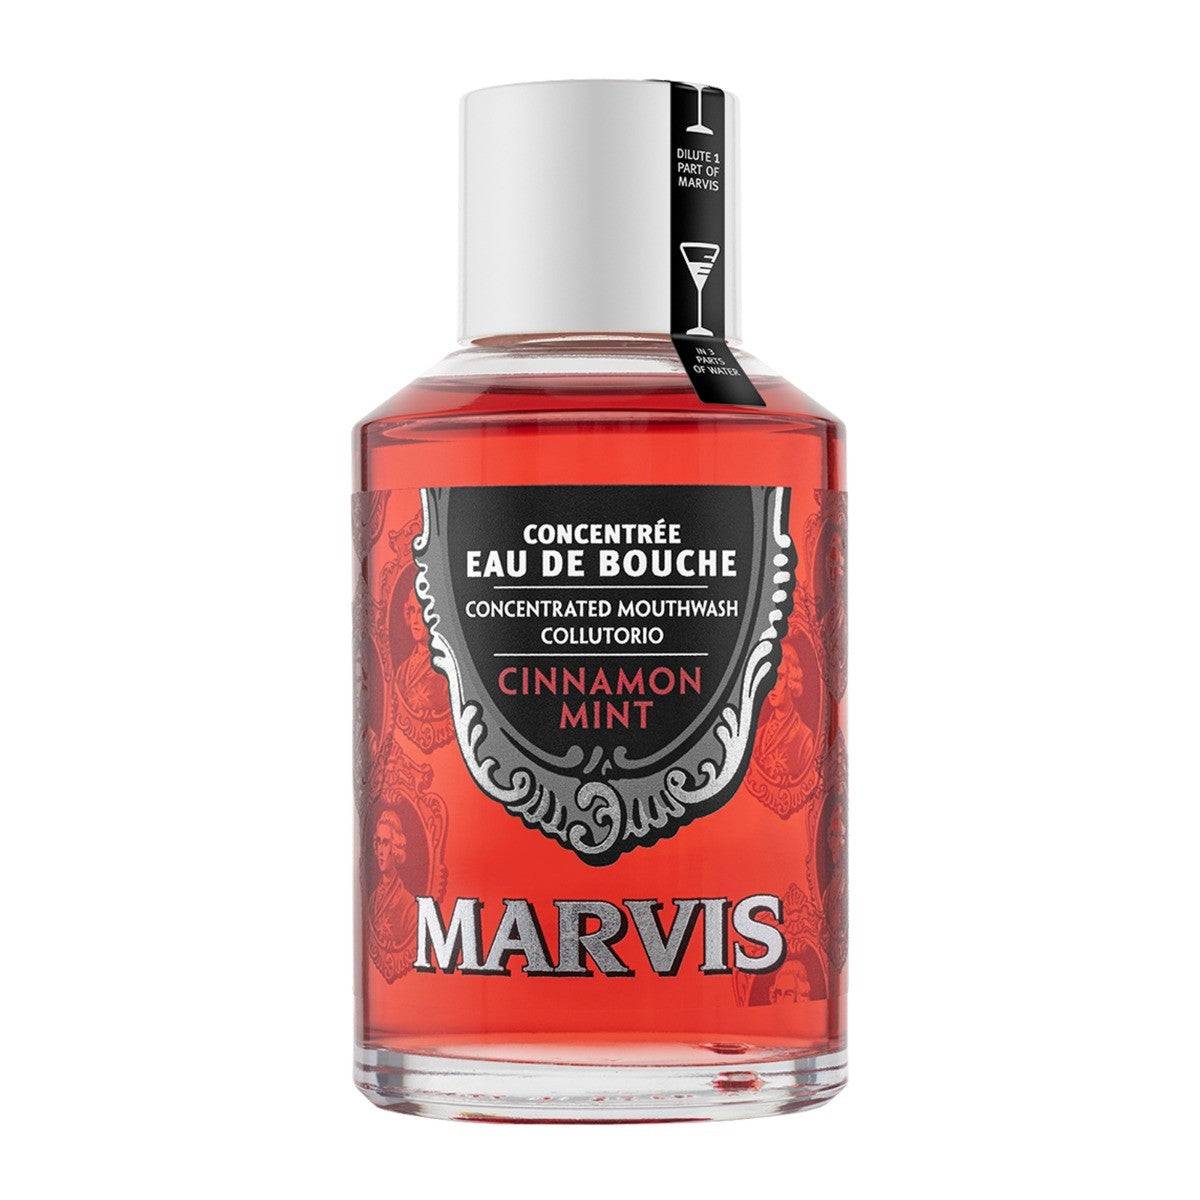 Marvis Cinnamon Mint Concentrated Mouth wash 120ml